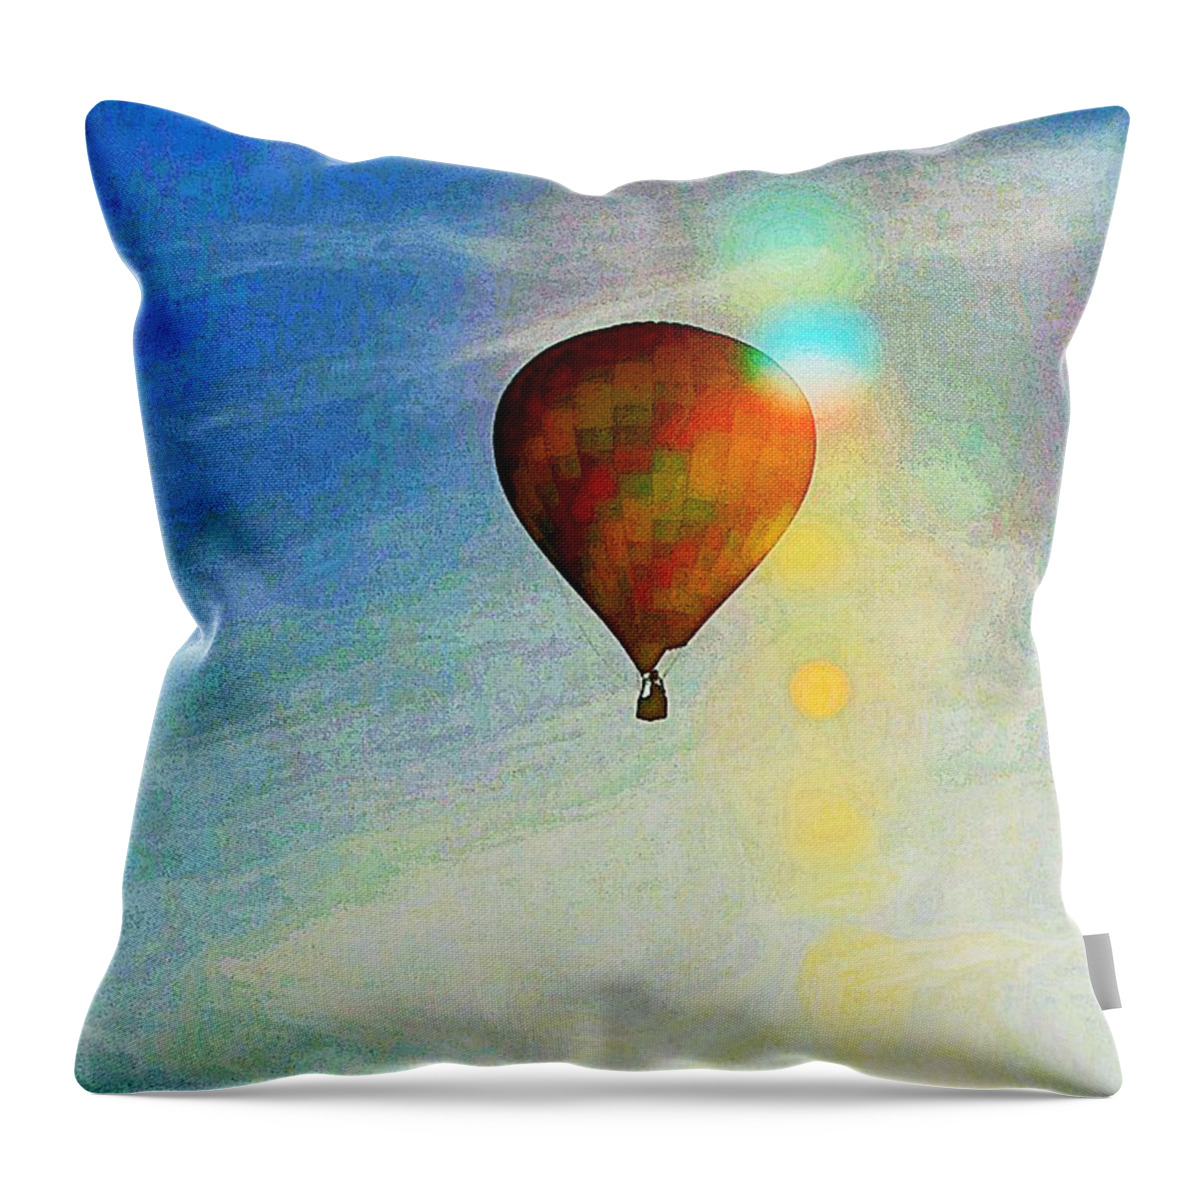 Balloon Throw Pillow featuring the photograph Icarus' Dream by Steve Warnstaff